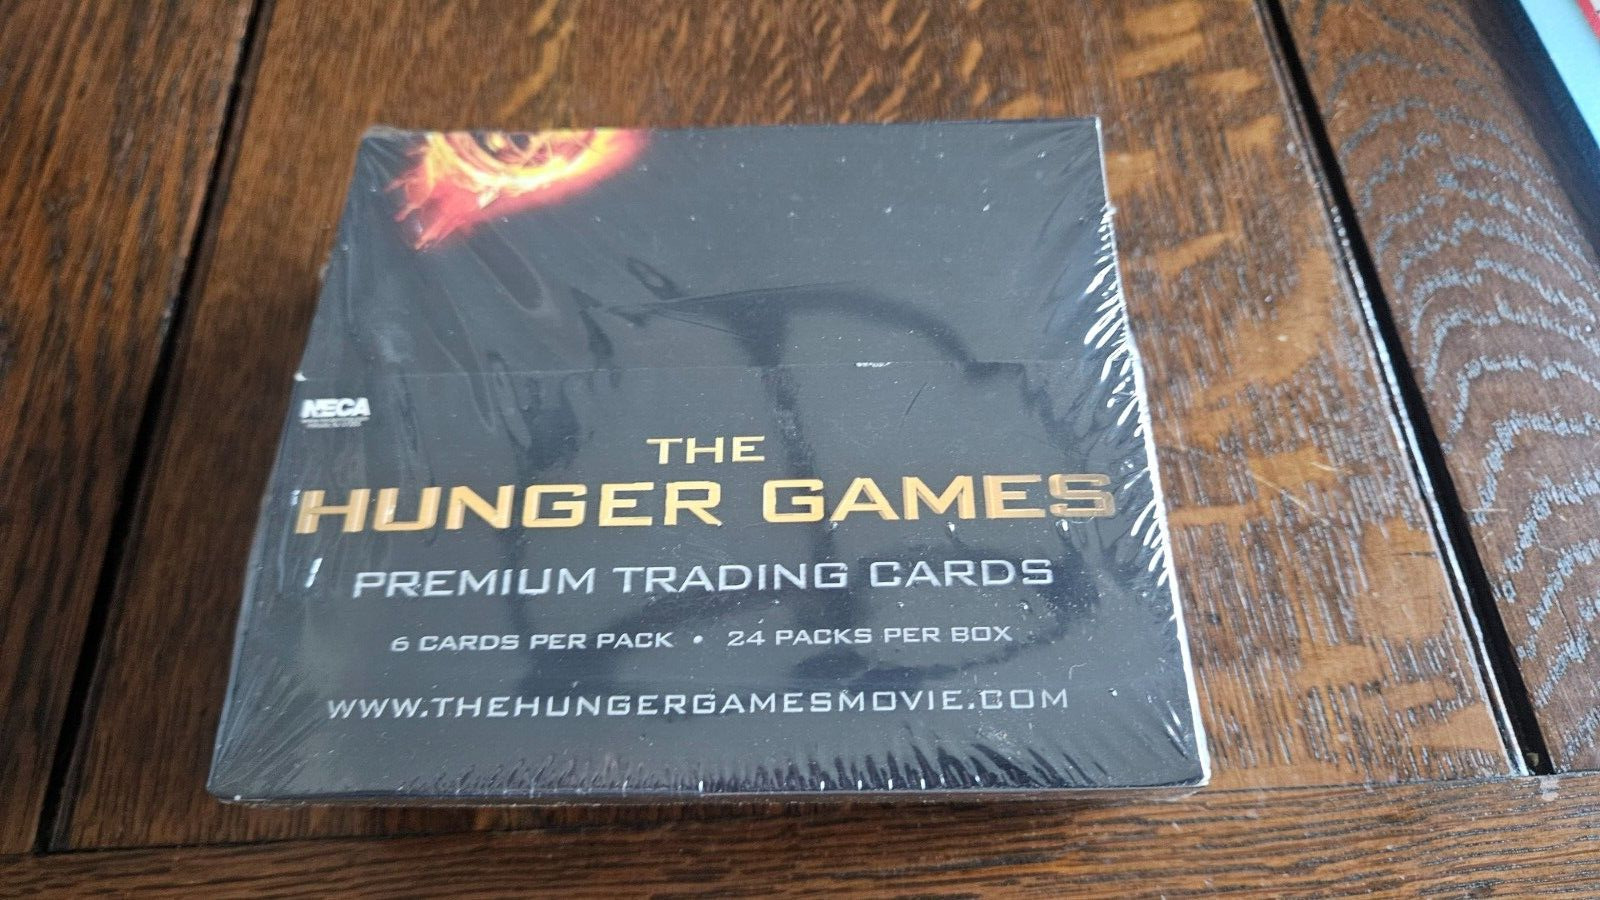 The Hunger Games Trading Cards Sealed Box 24 packs